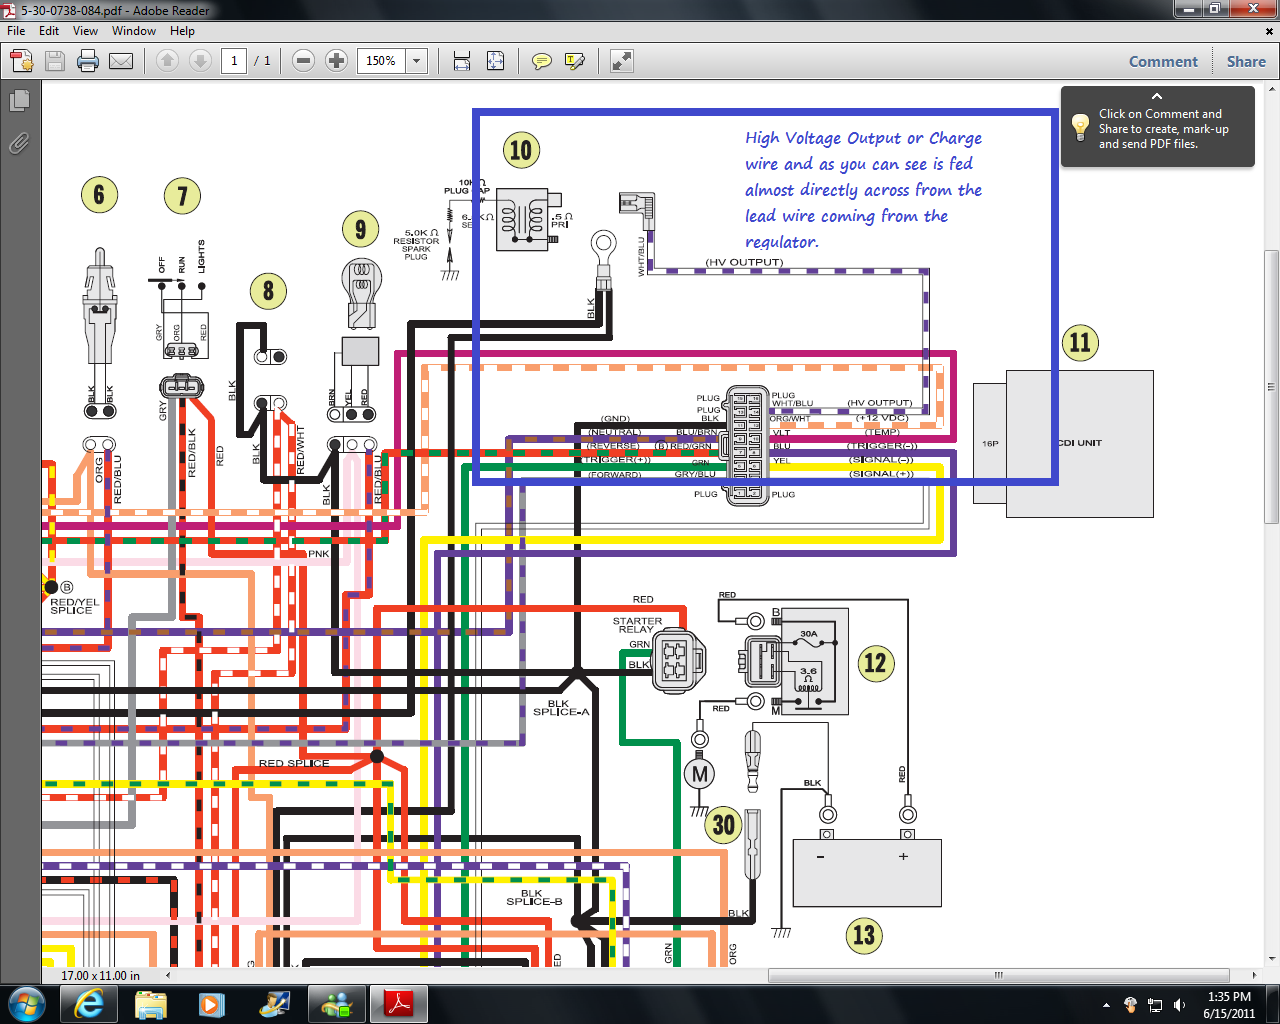 Wiring Diagram For A Ignition Coil For A 2005 Suzuki 400 Quad from diagramweb.net